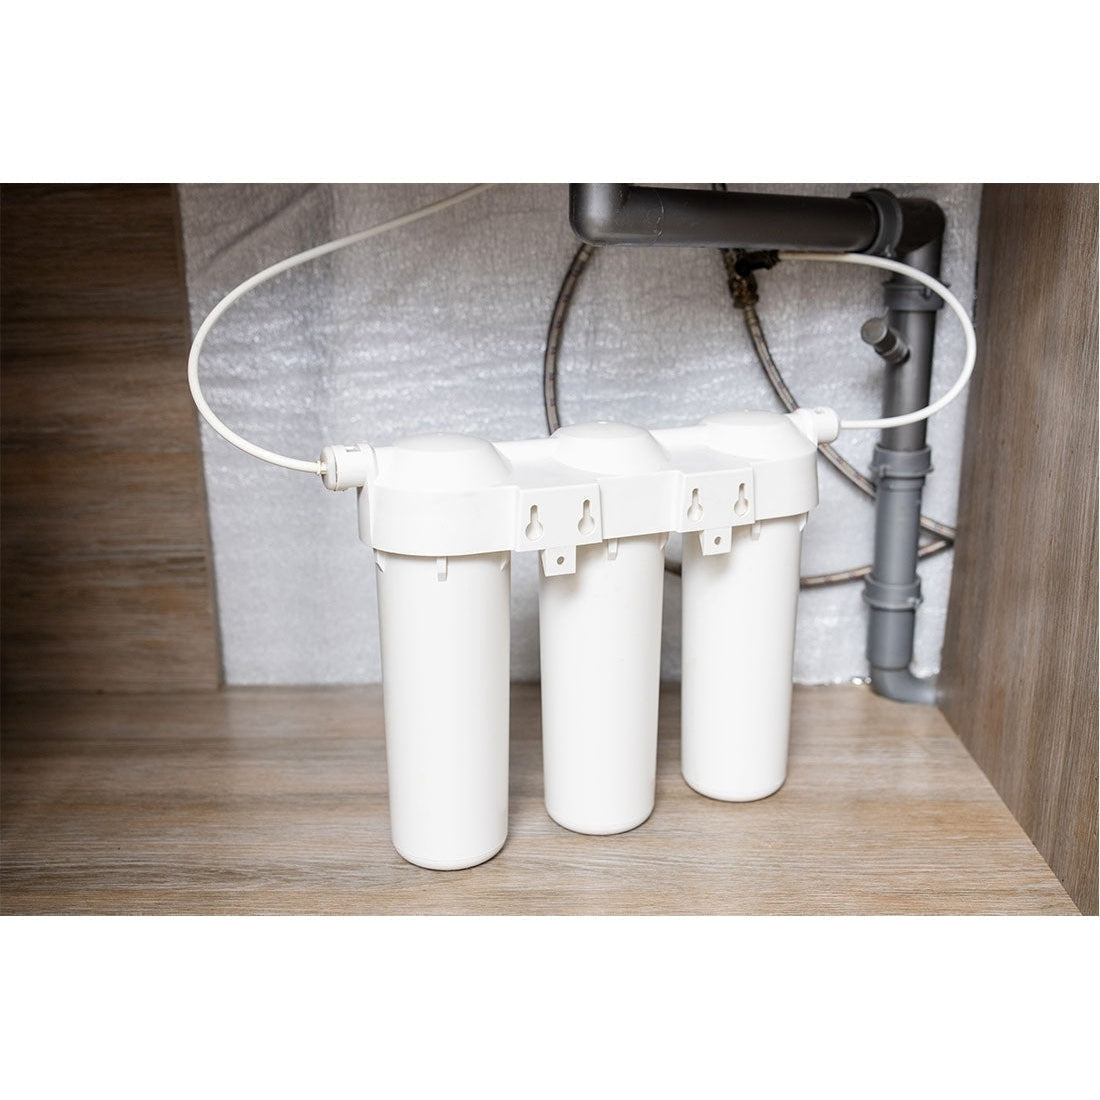 An Easy-To-Understand Under Sink Water Filter Installation Guide-Vita Filters